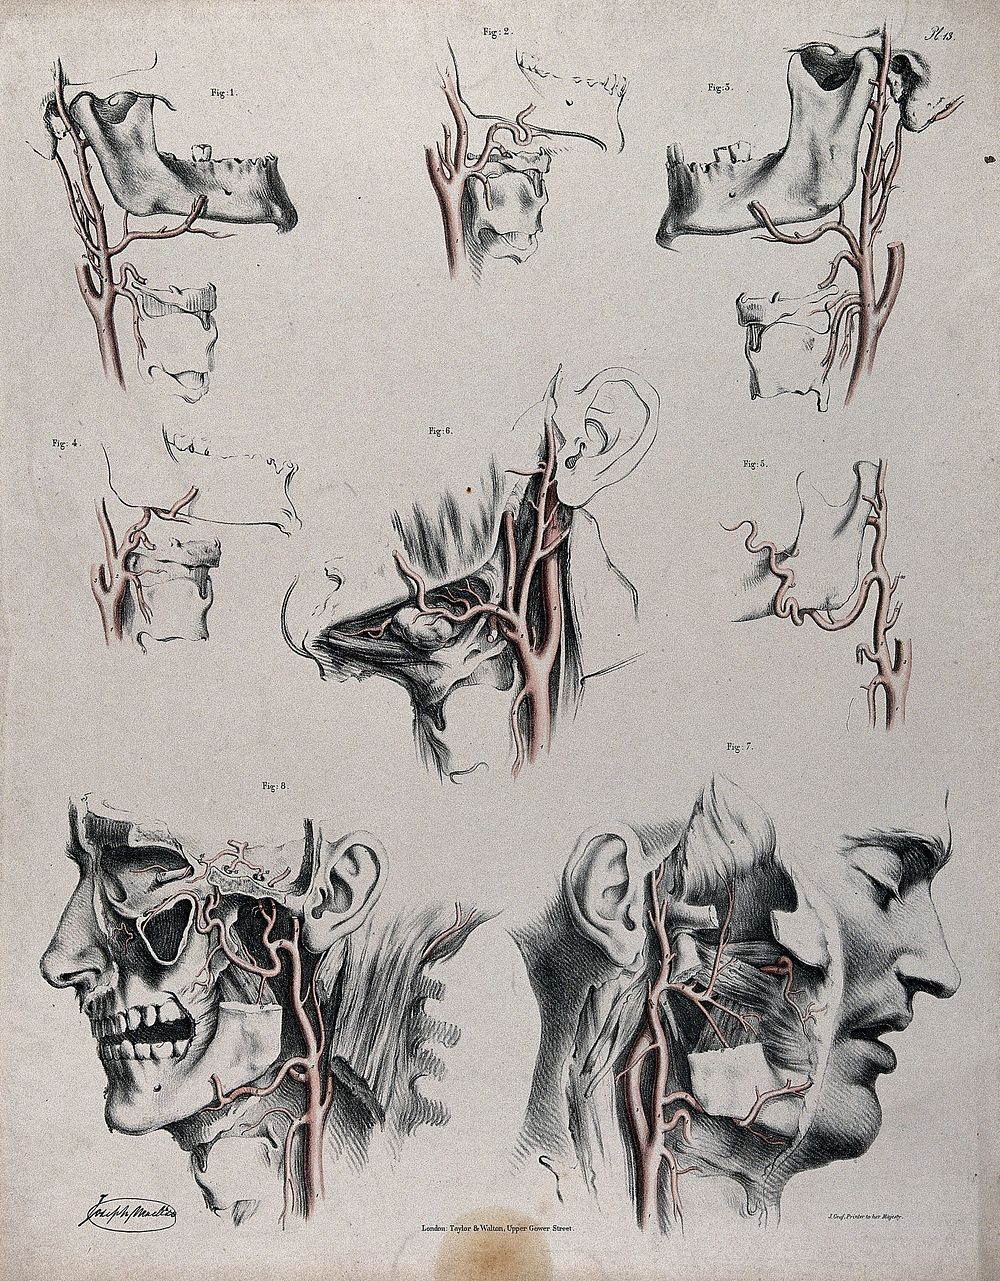 The circulatory system: dissections of the neck, jaw and face of a man, with arteries and blood vessels indicated in red.…